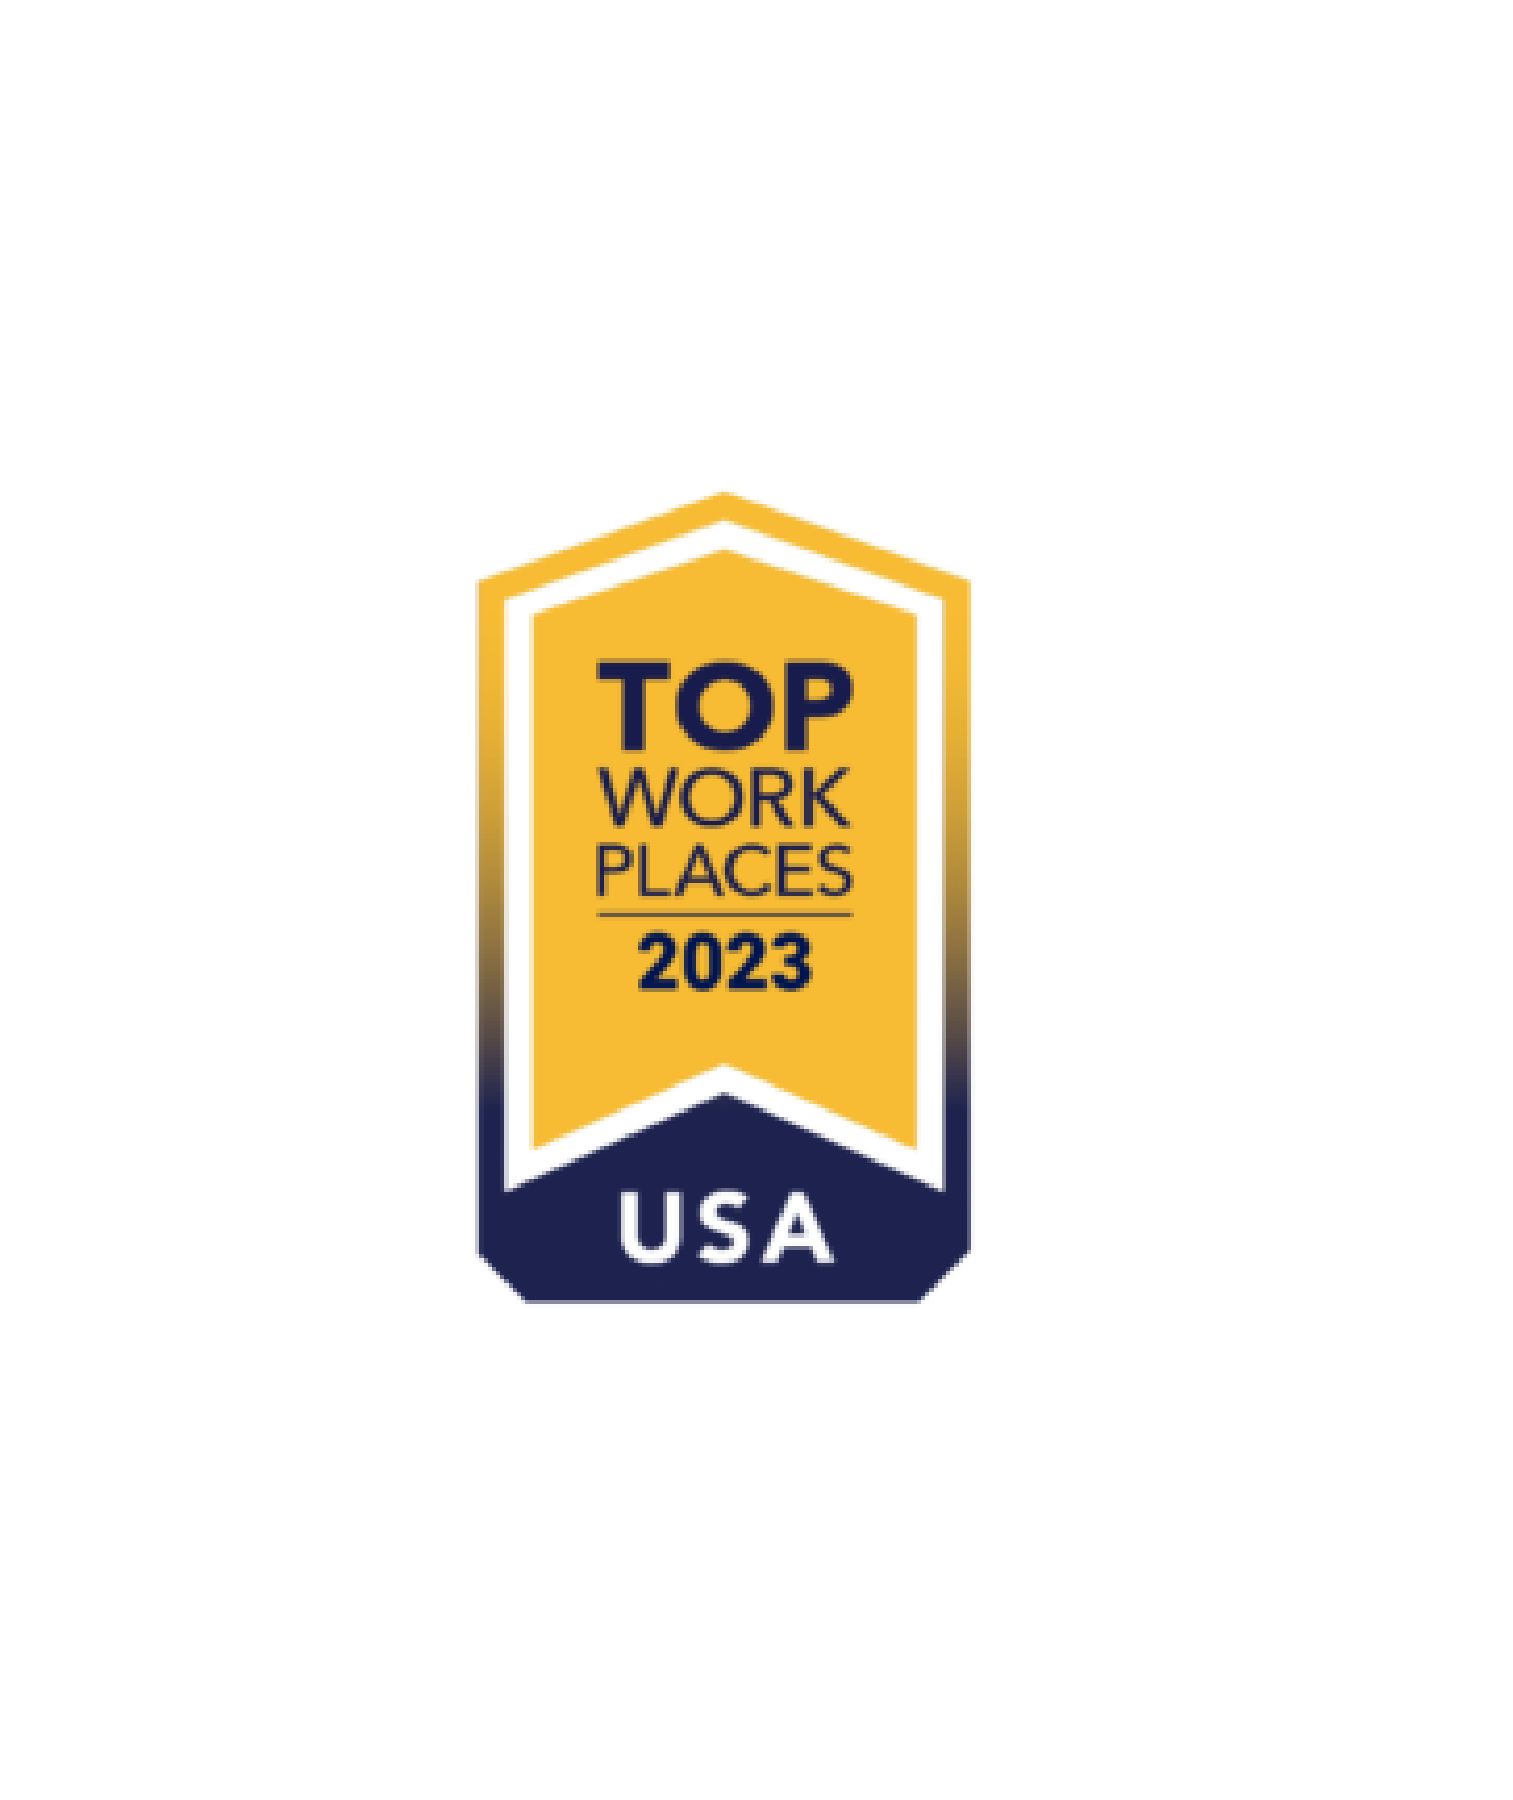 Top work places USA 2023